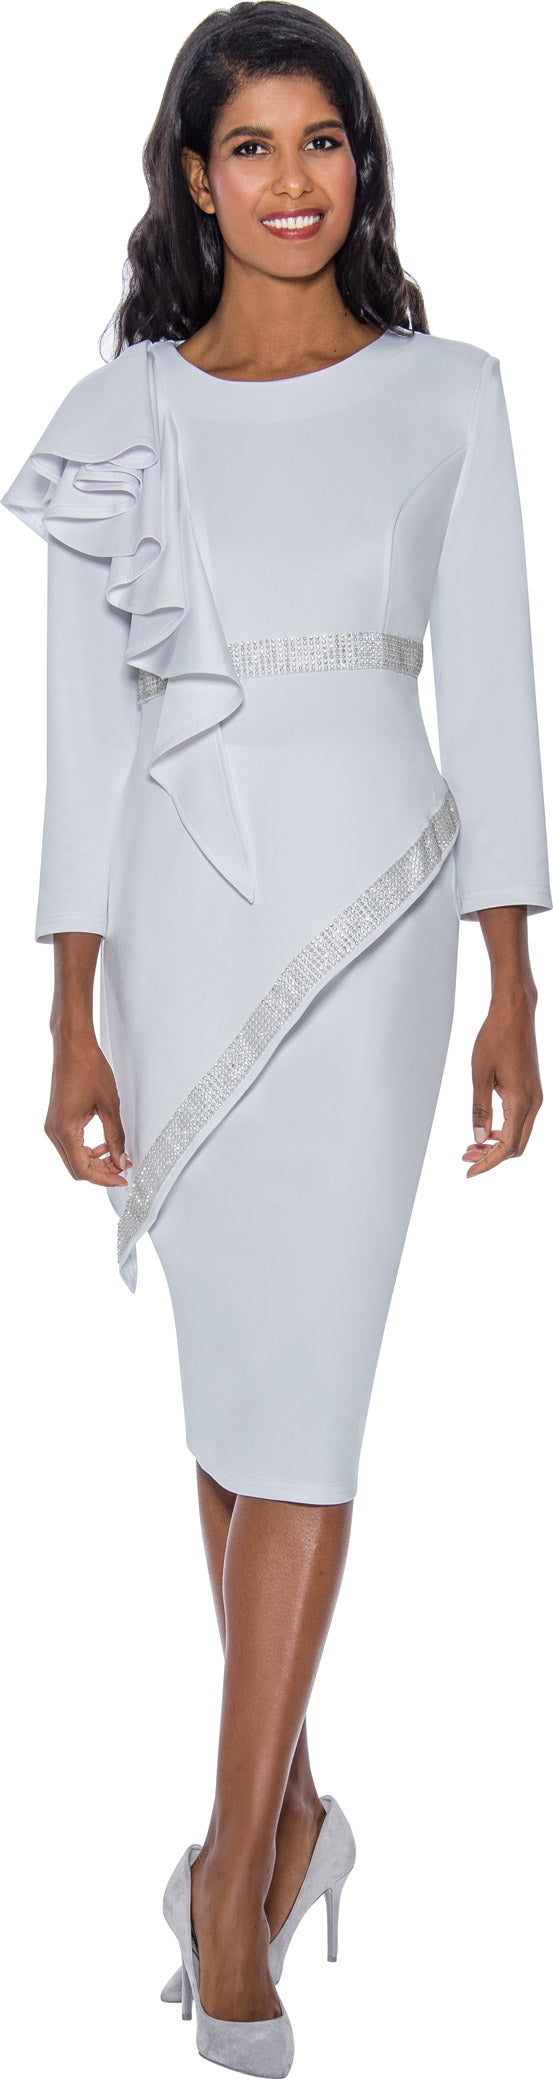 Stellar Looks Skirt Suit 1662C-White - Church Suits For Less